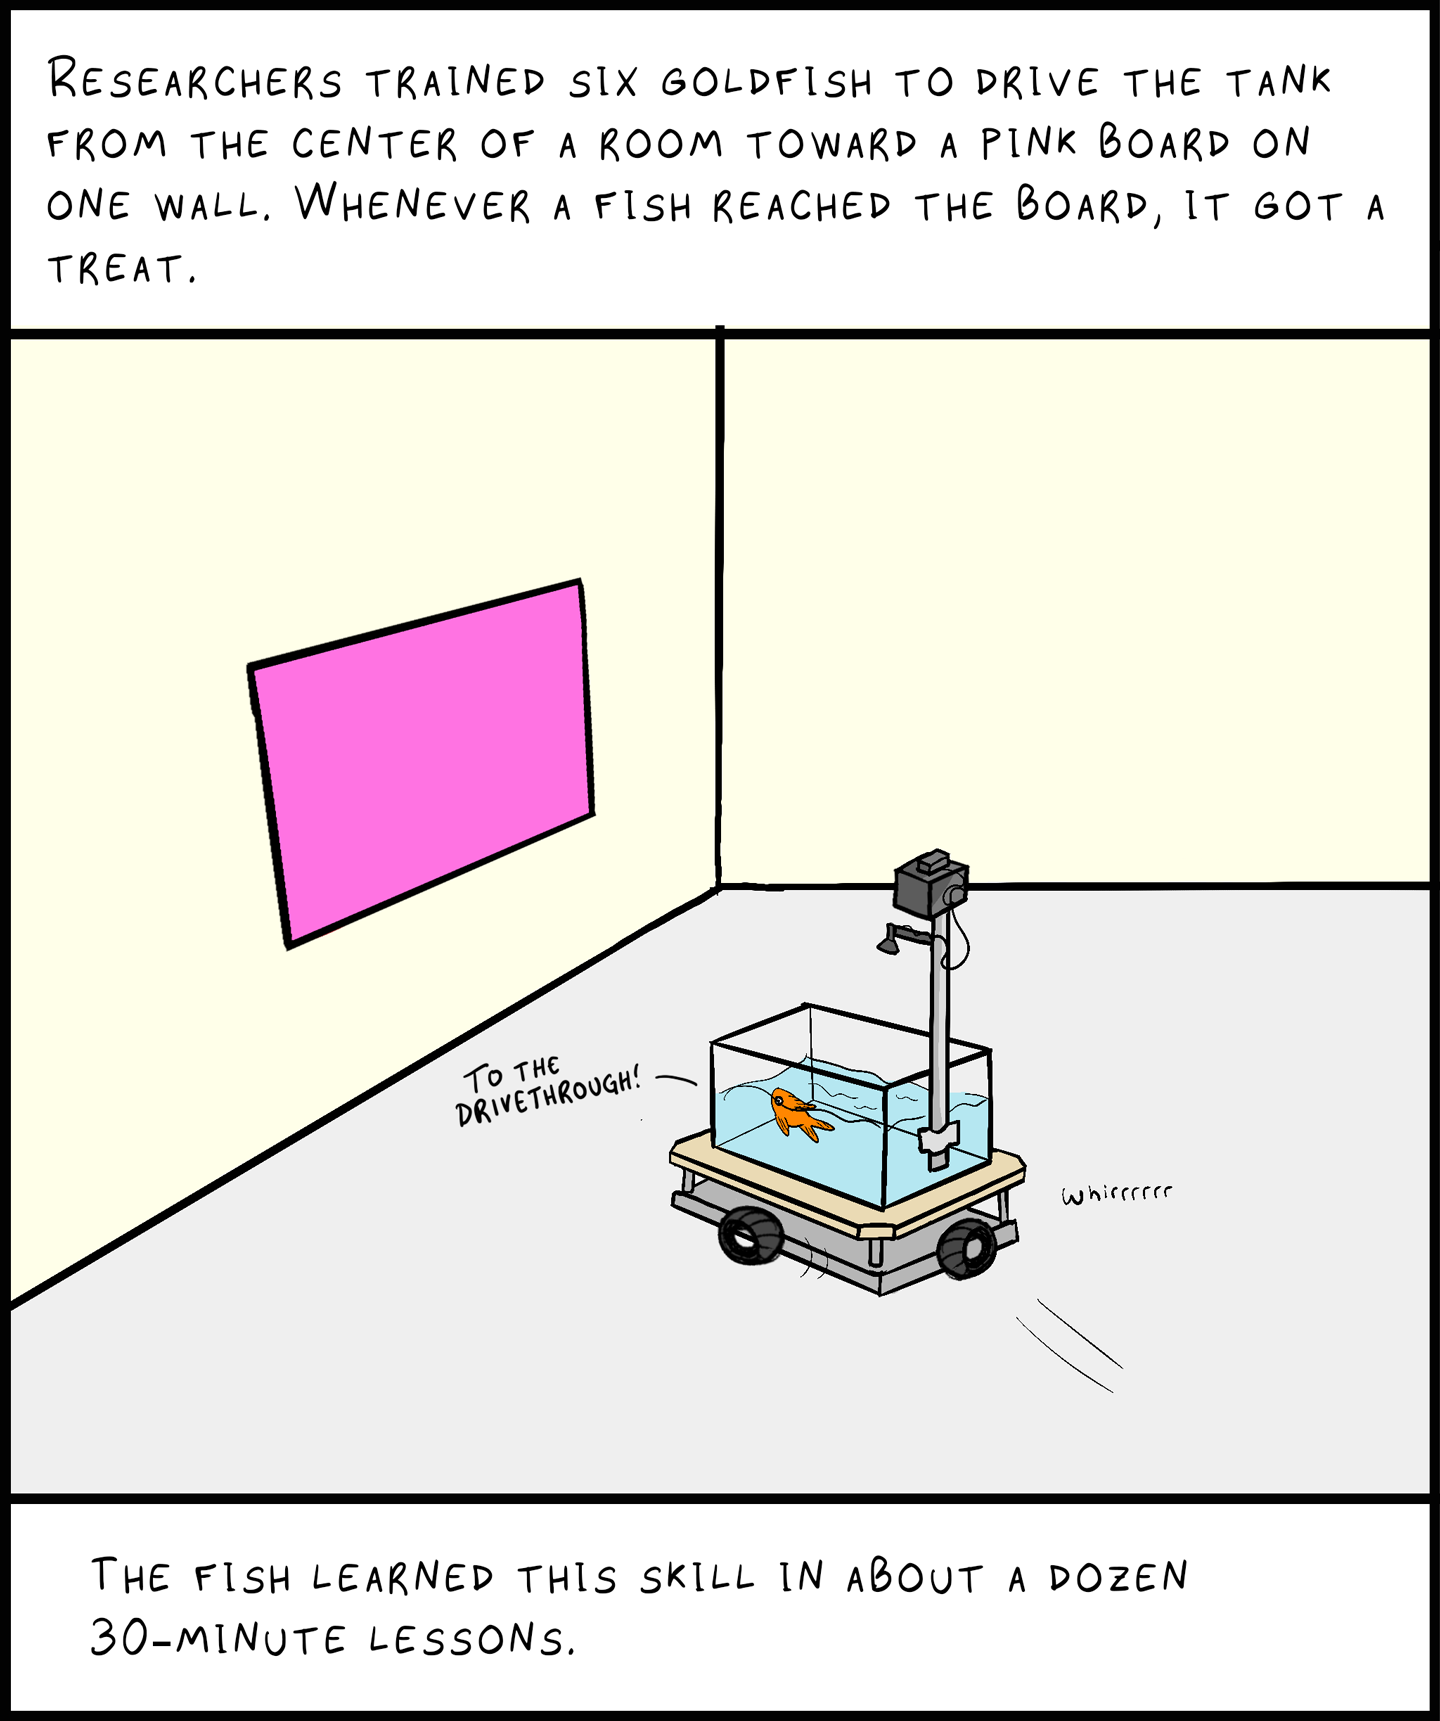 Image: A goldfish in a tank on wheels heads towards a big pink square on the wall. [Fish speech bubble: To the drive-through!]

Image text (top): Researchers trained six goldfish to drive the tank from the center of a room toward a pink board on one wall. Whenever a fish reached the board, it got a treat.

Image text (bottom): The fish learned this skill in about a dozen 30-minute lessons.